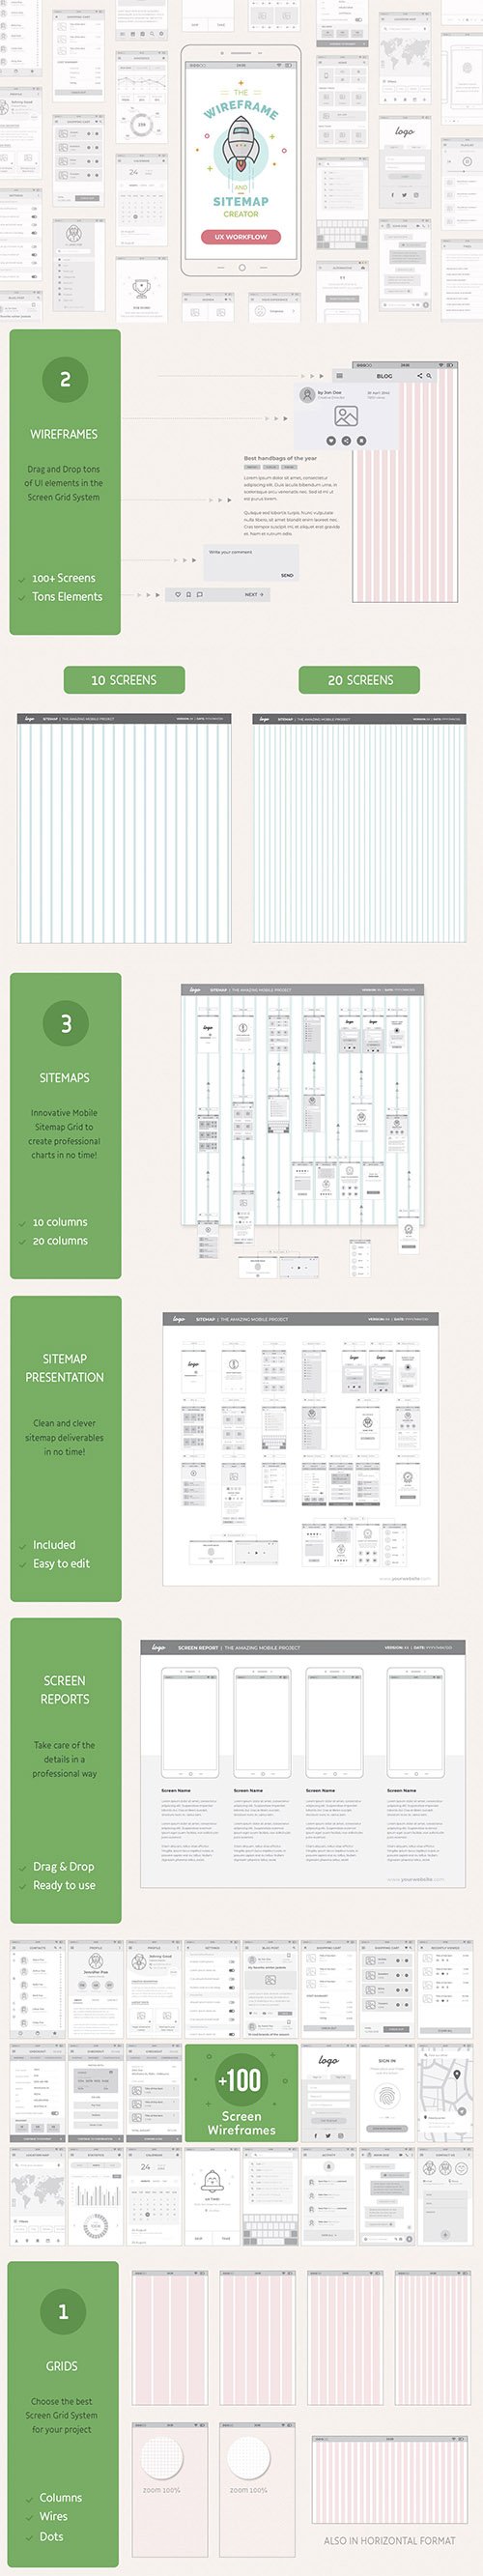 UX Workflow - Mobile Wireframe and Sitemap Creator